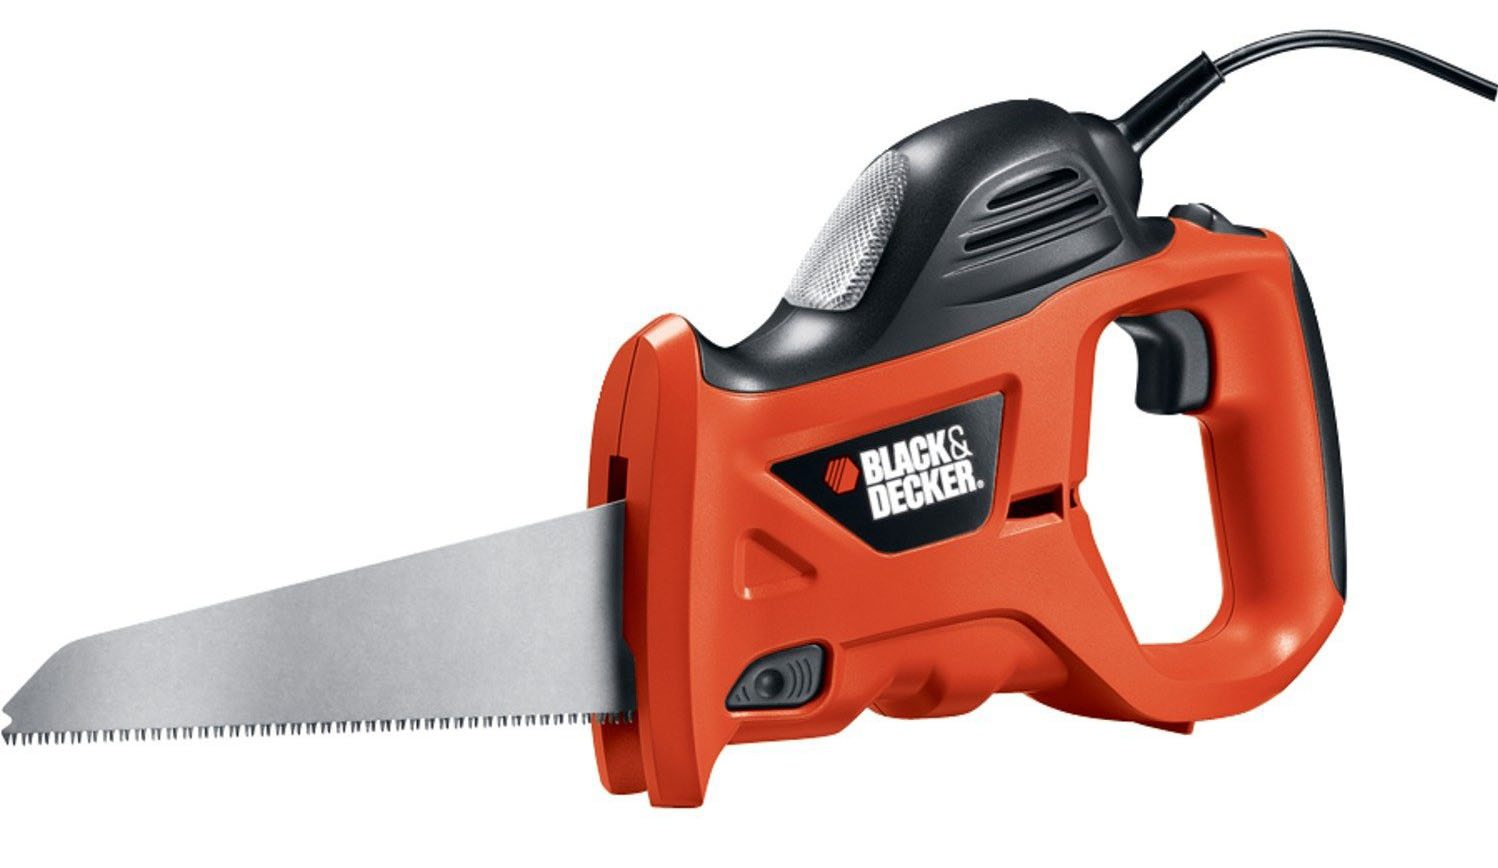 The Best Saw For Cutting Wood Buying Guide 7routertables